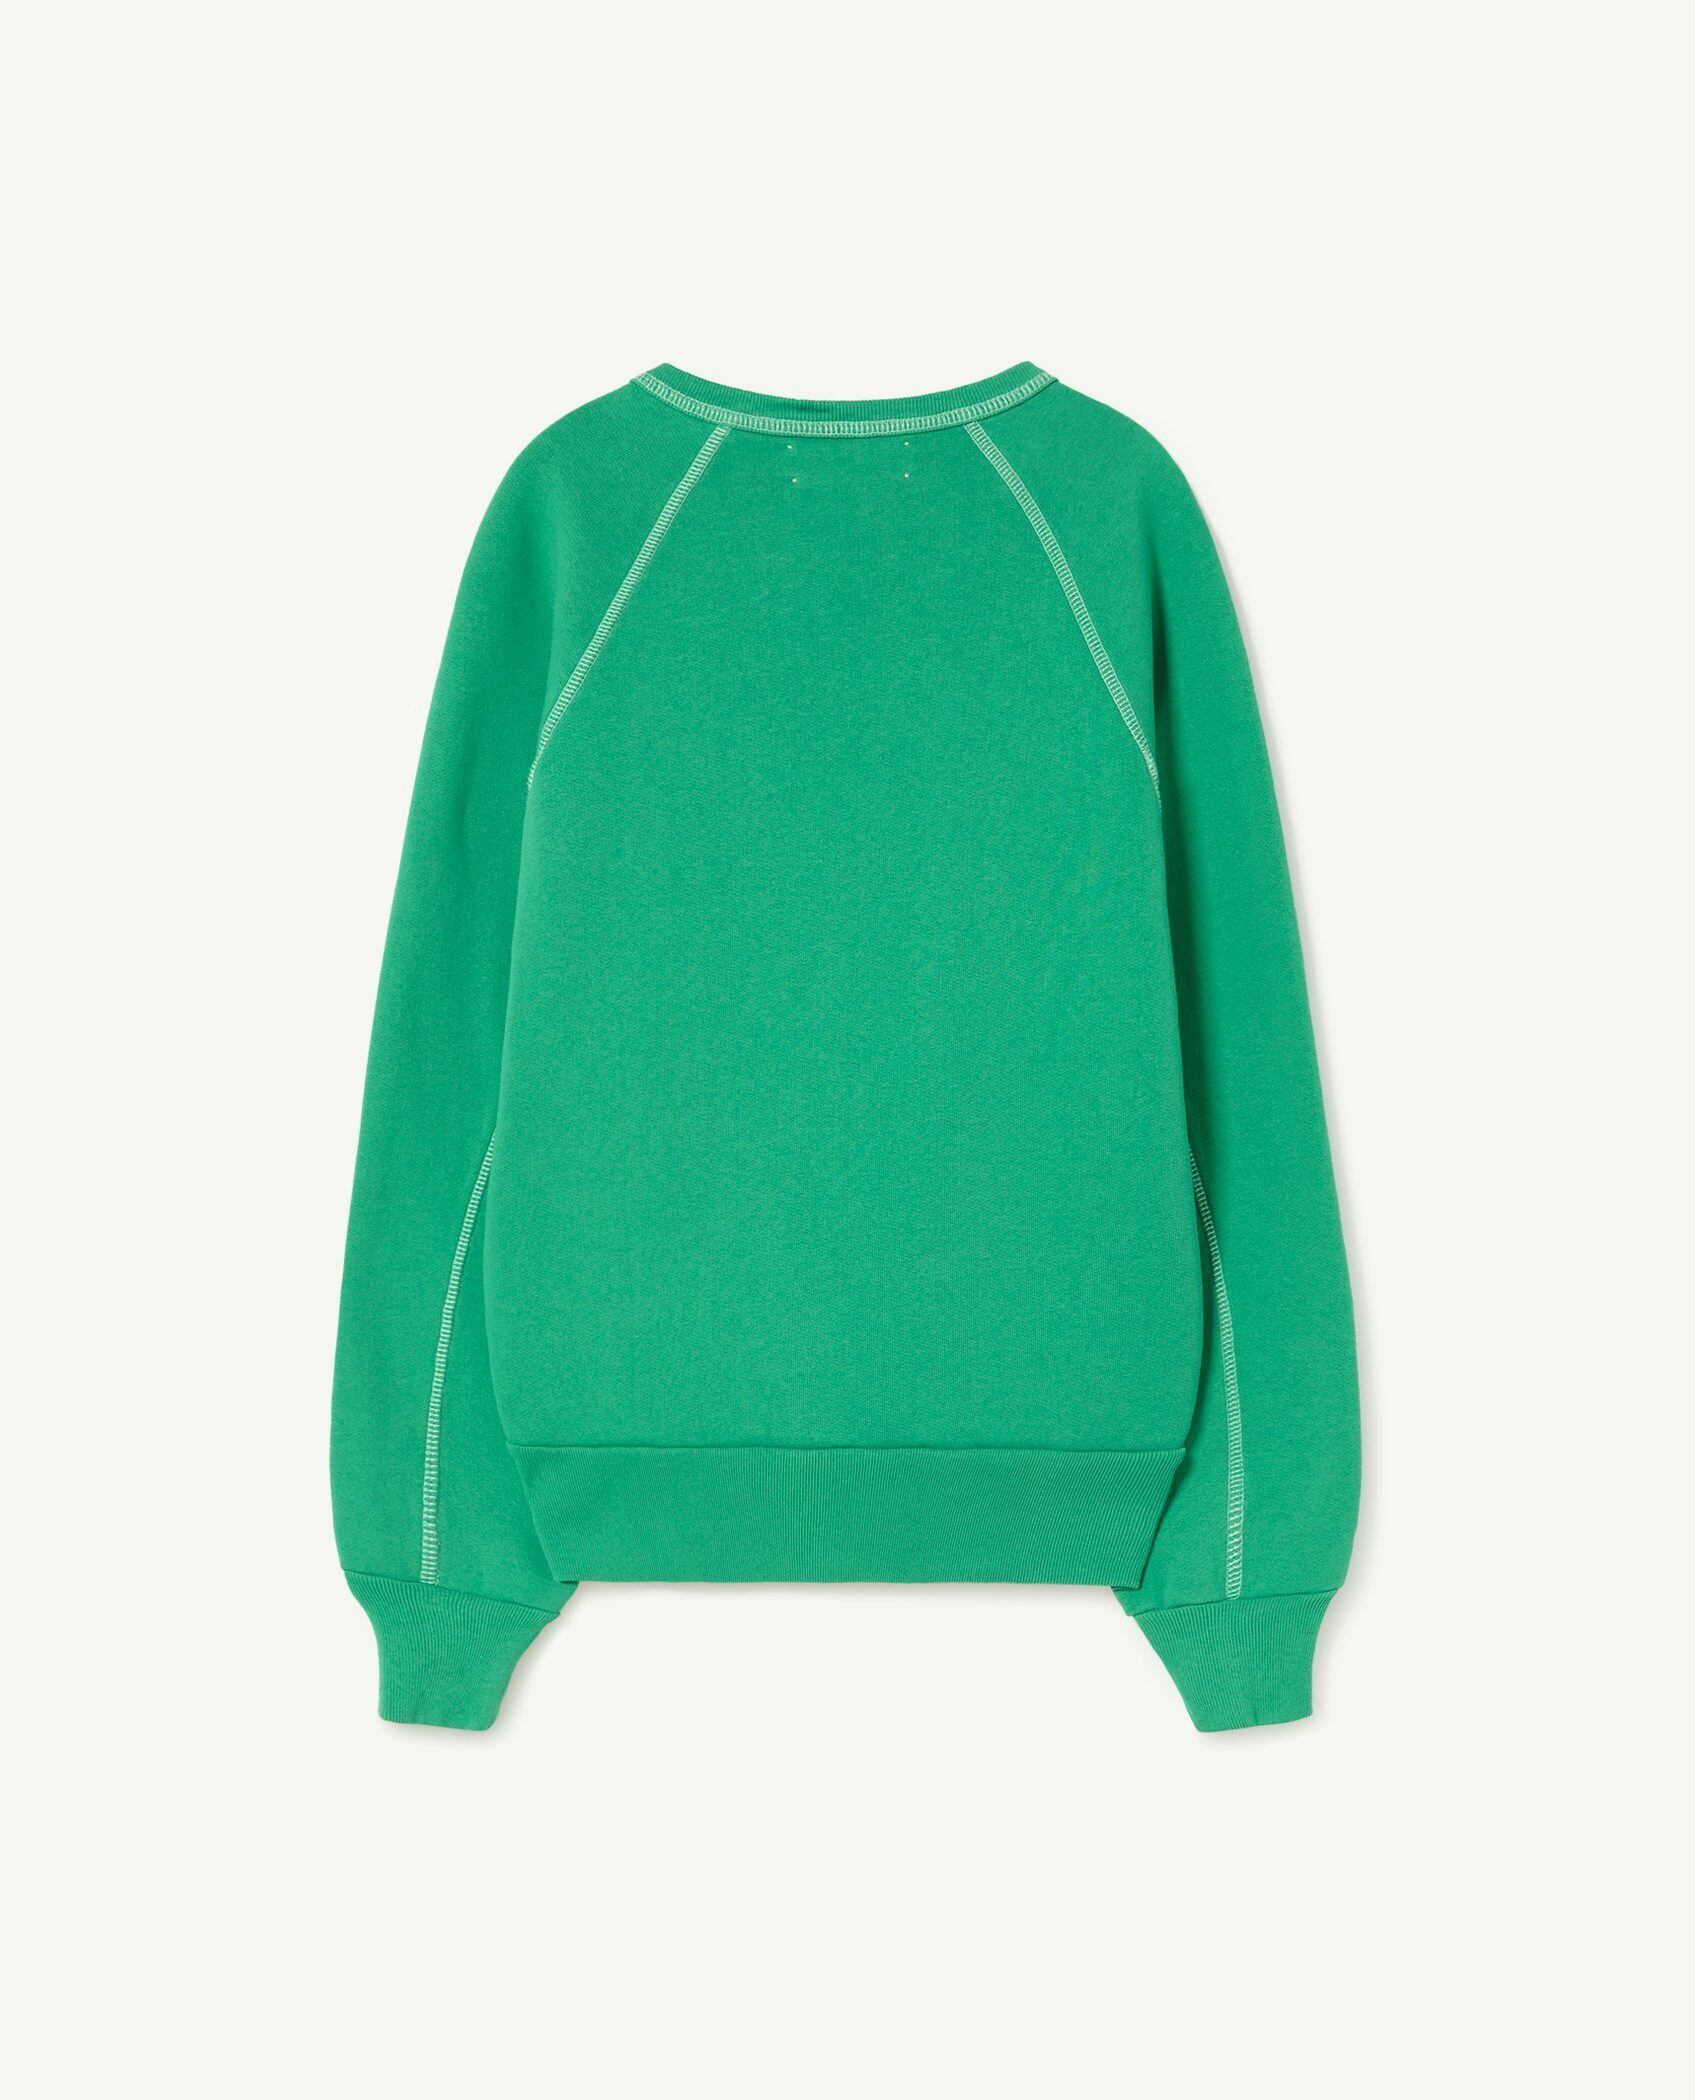 23AW】the animals observatory ( TAO ) JERSEY TOPS SHARK GREEN FORM